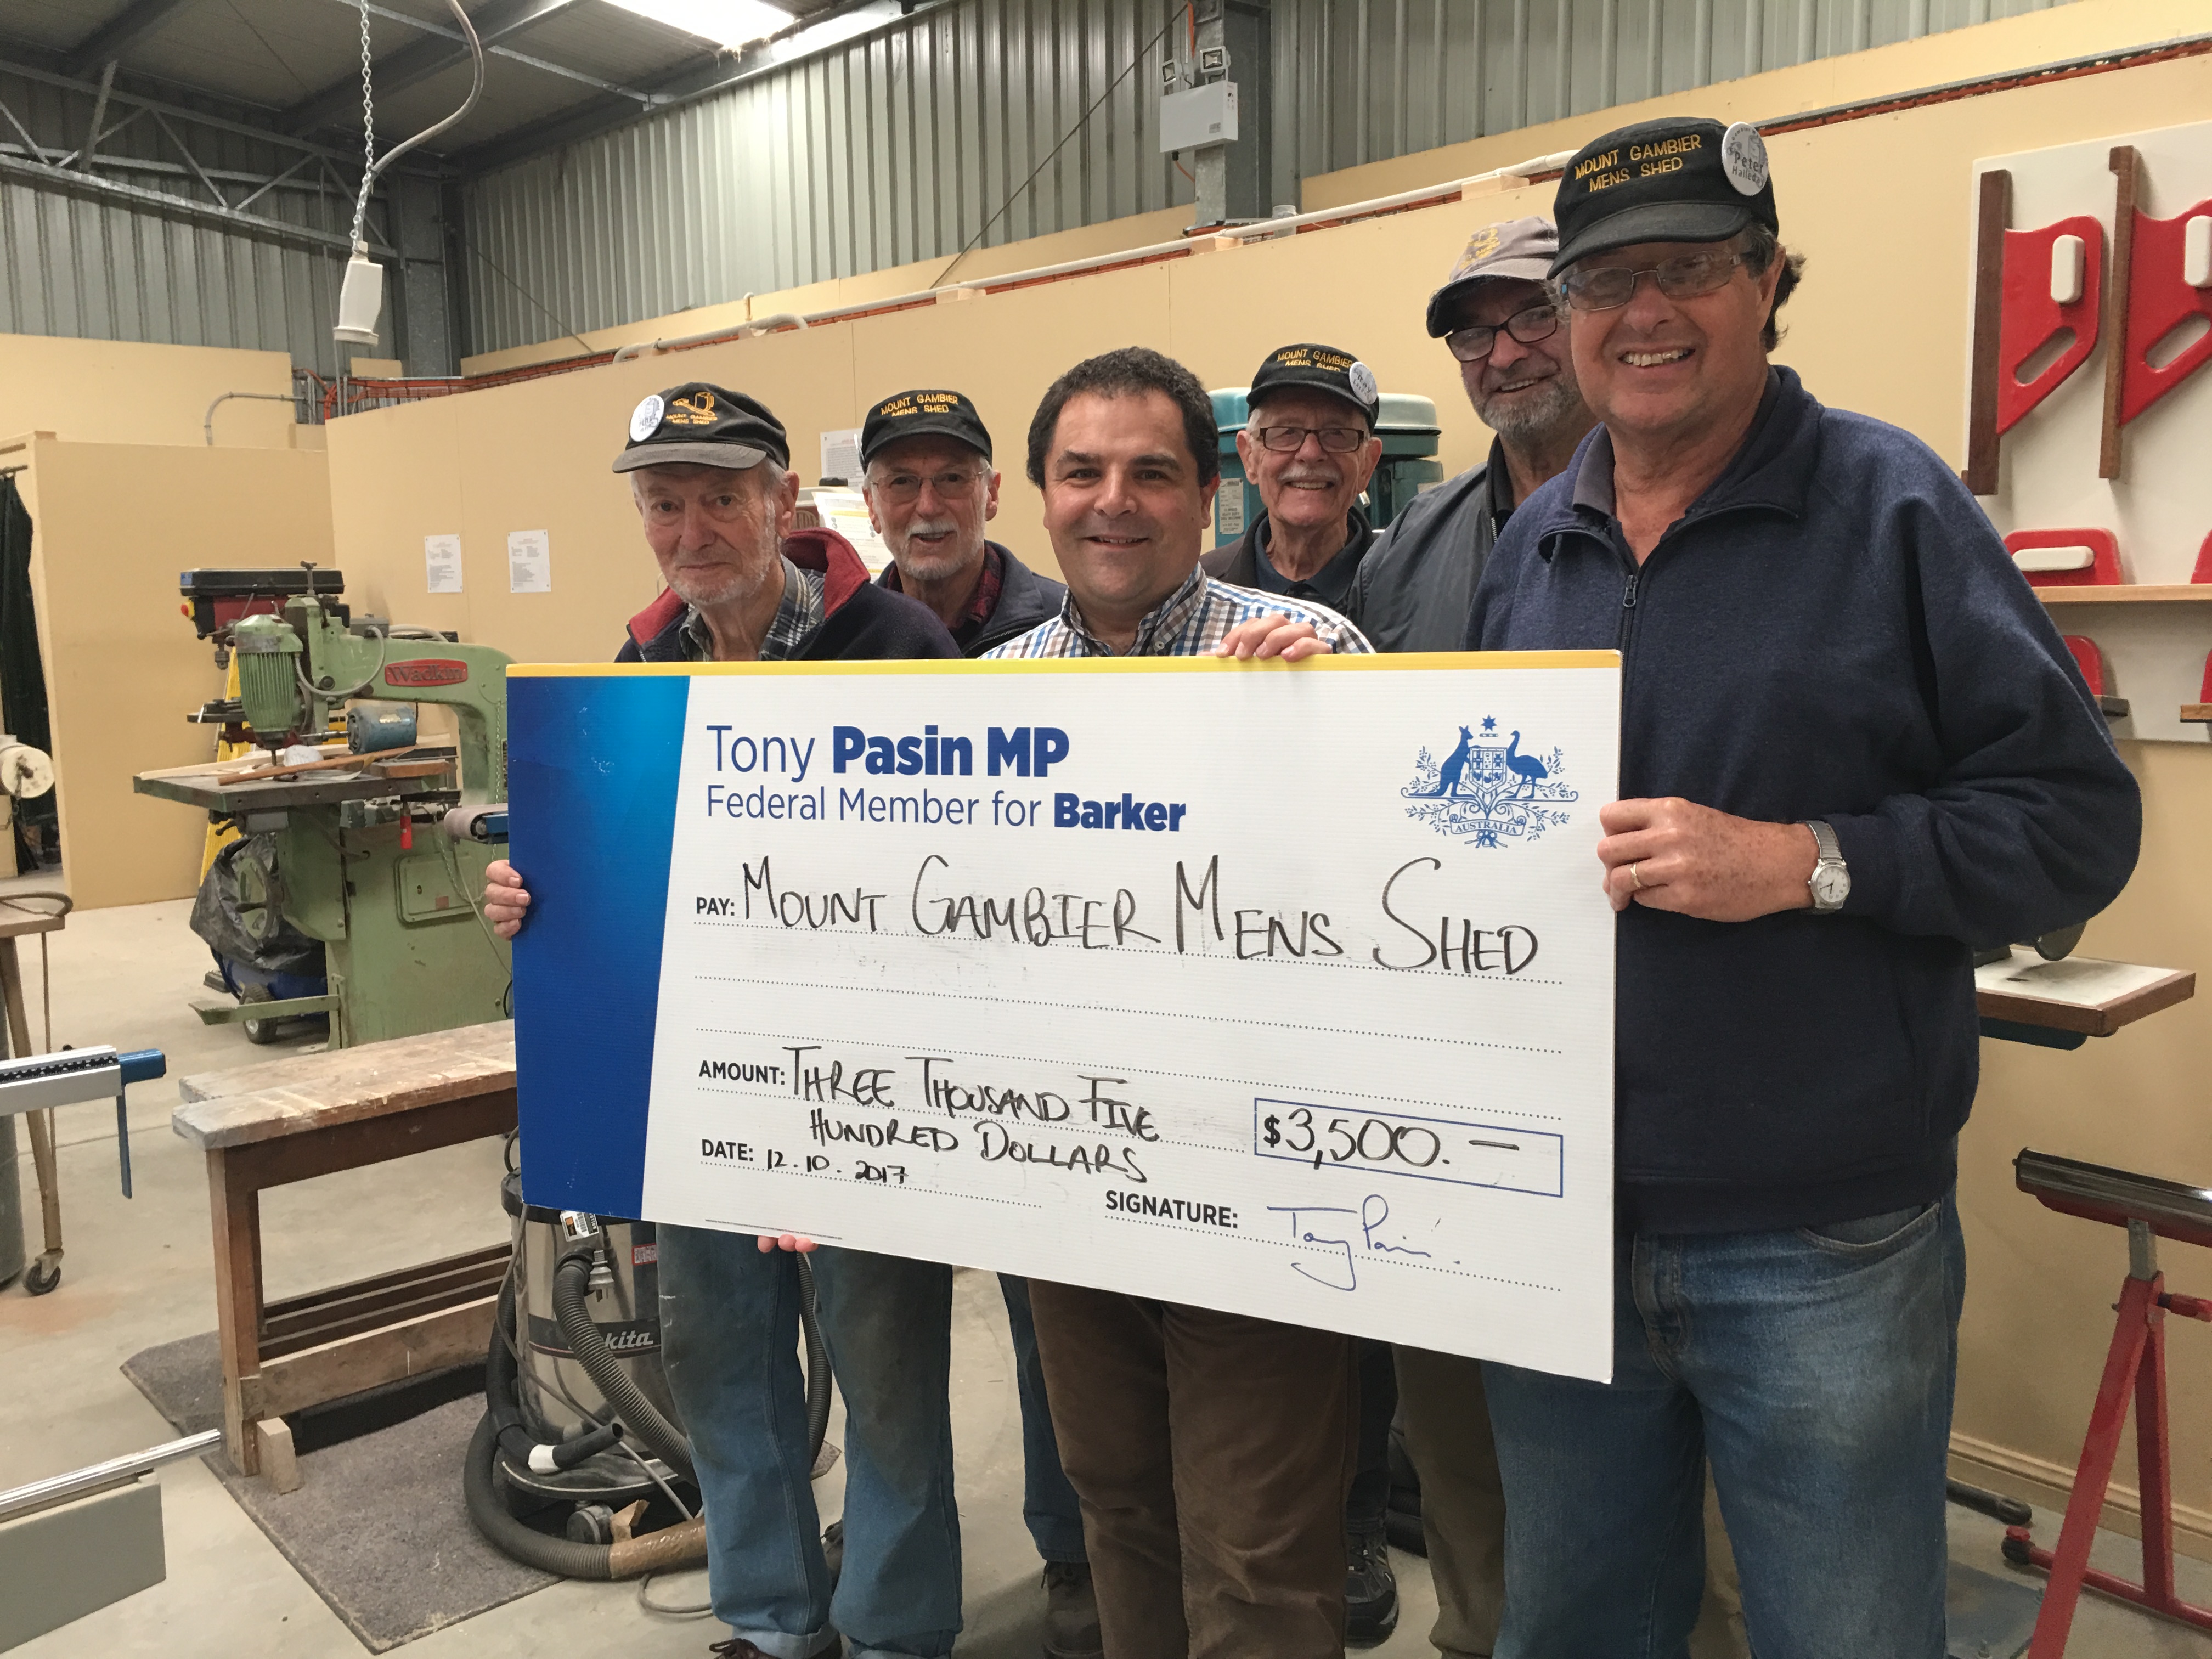 New funding grant for Mount Gambier Men’s Shed